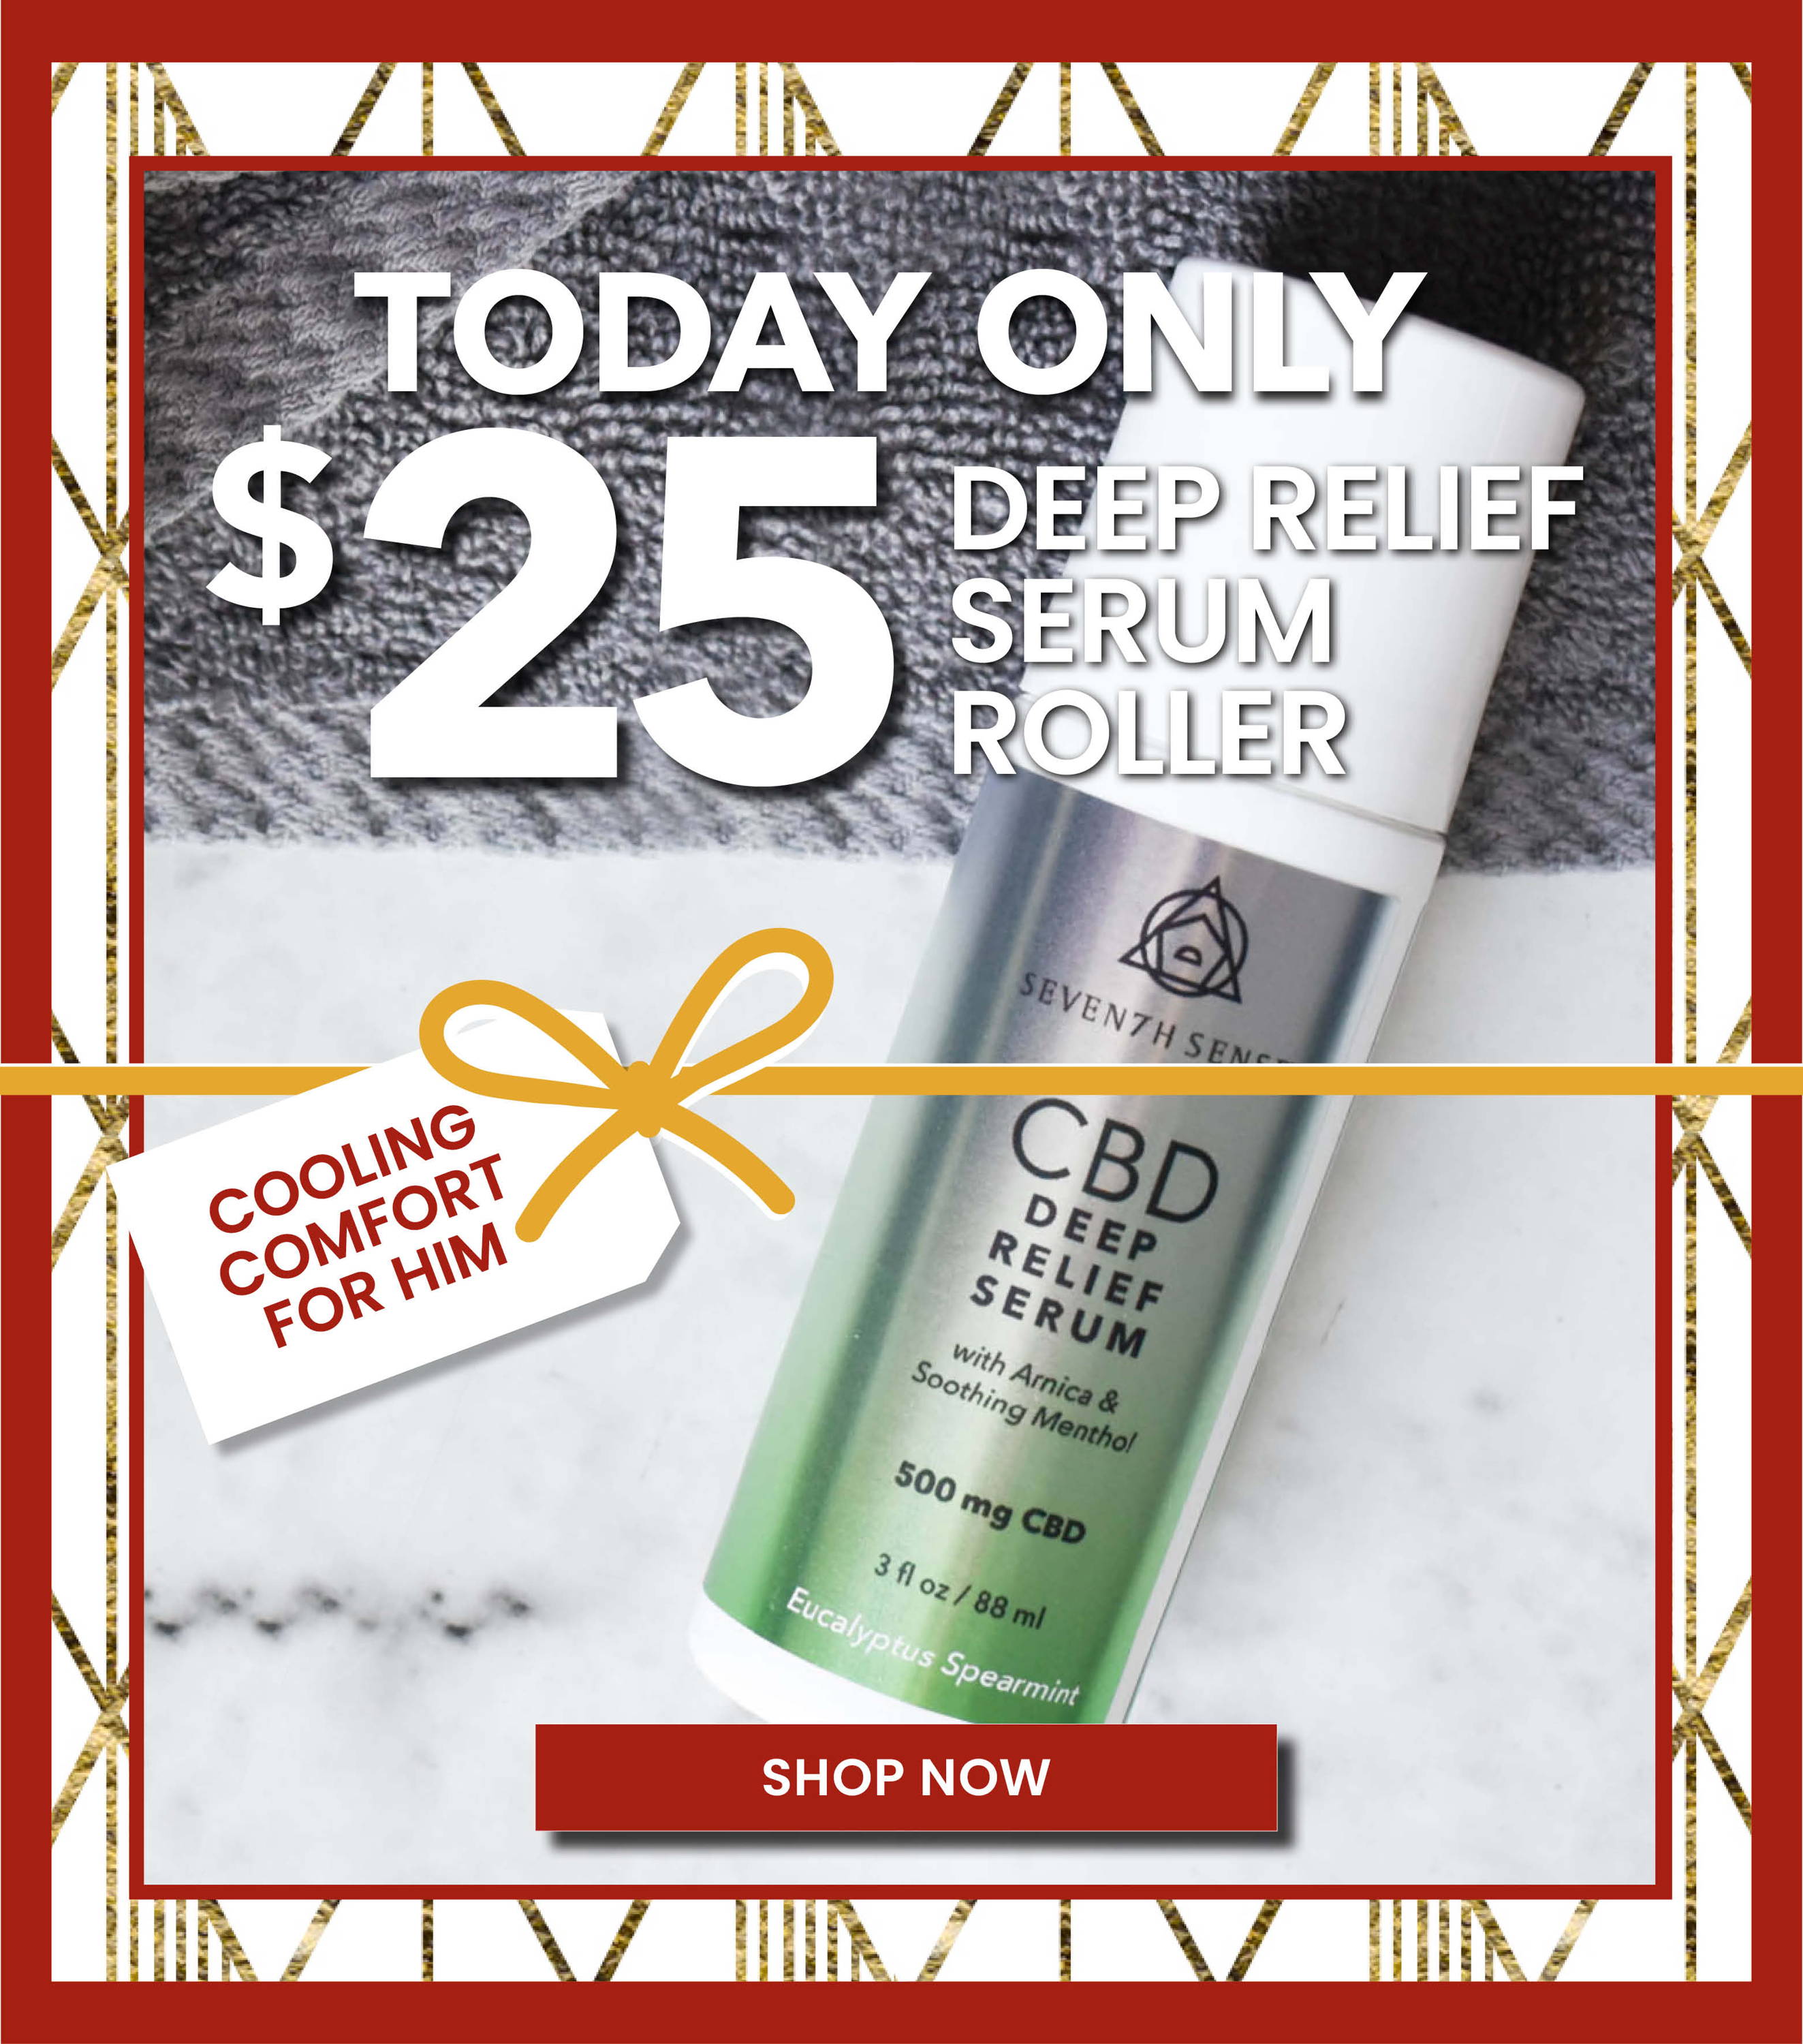 Today Only! $25 Deep Relief Serum Roller